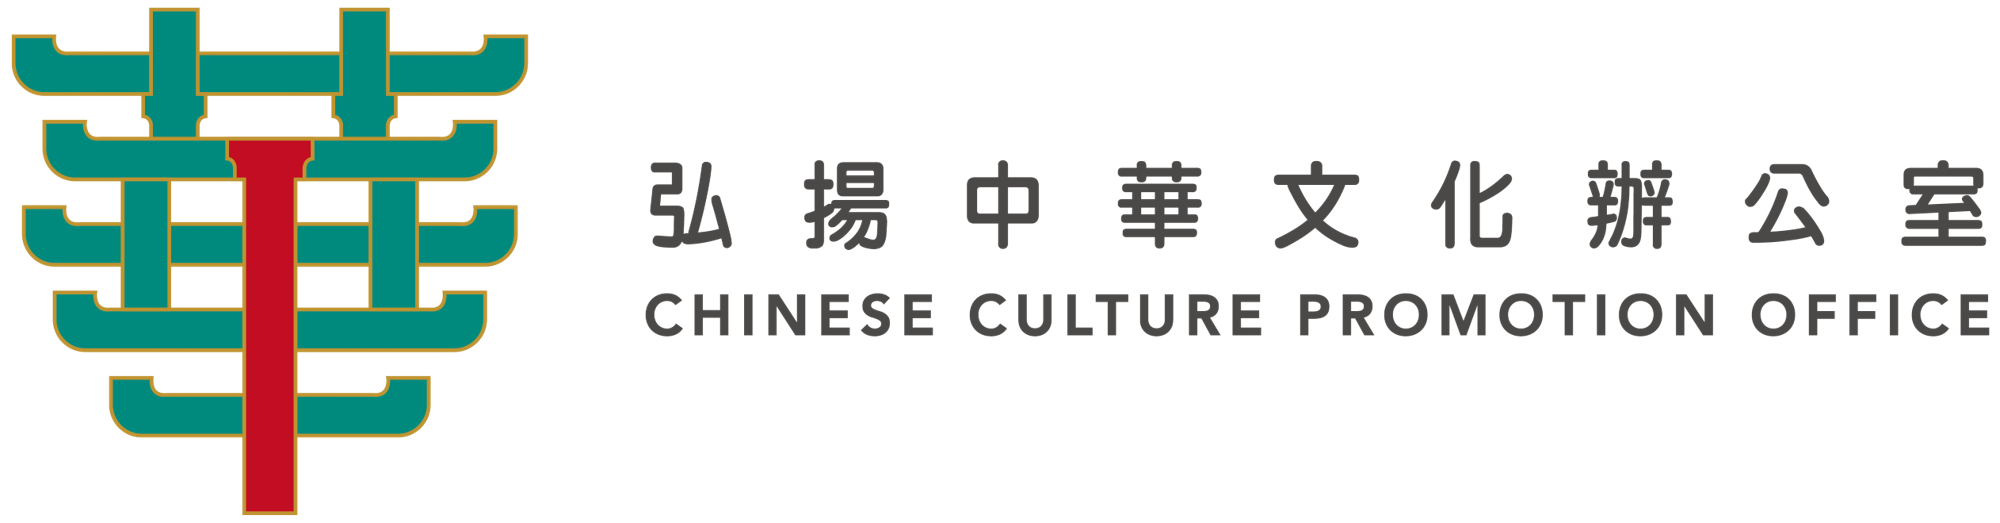 Chinese Culture Promotion Office logo